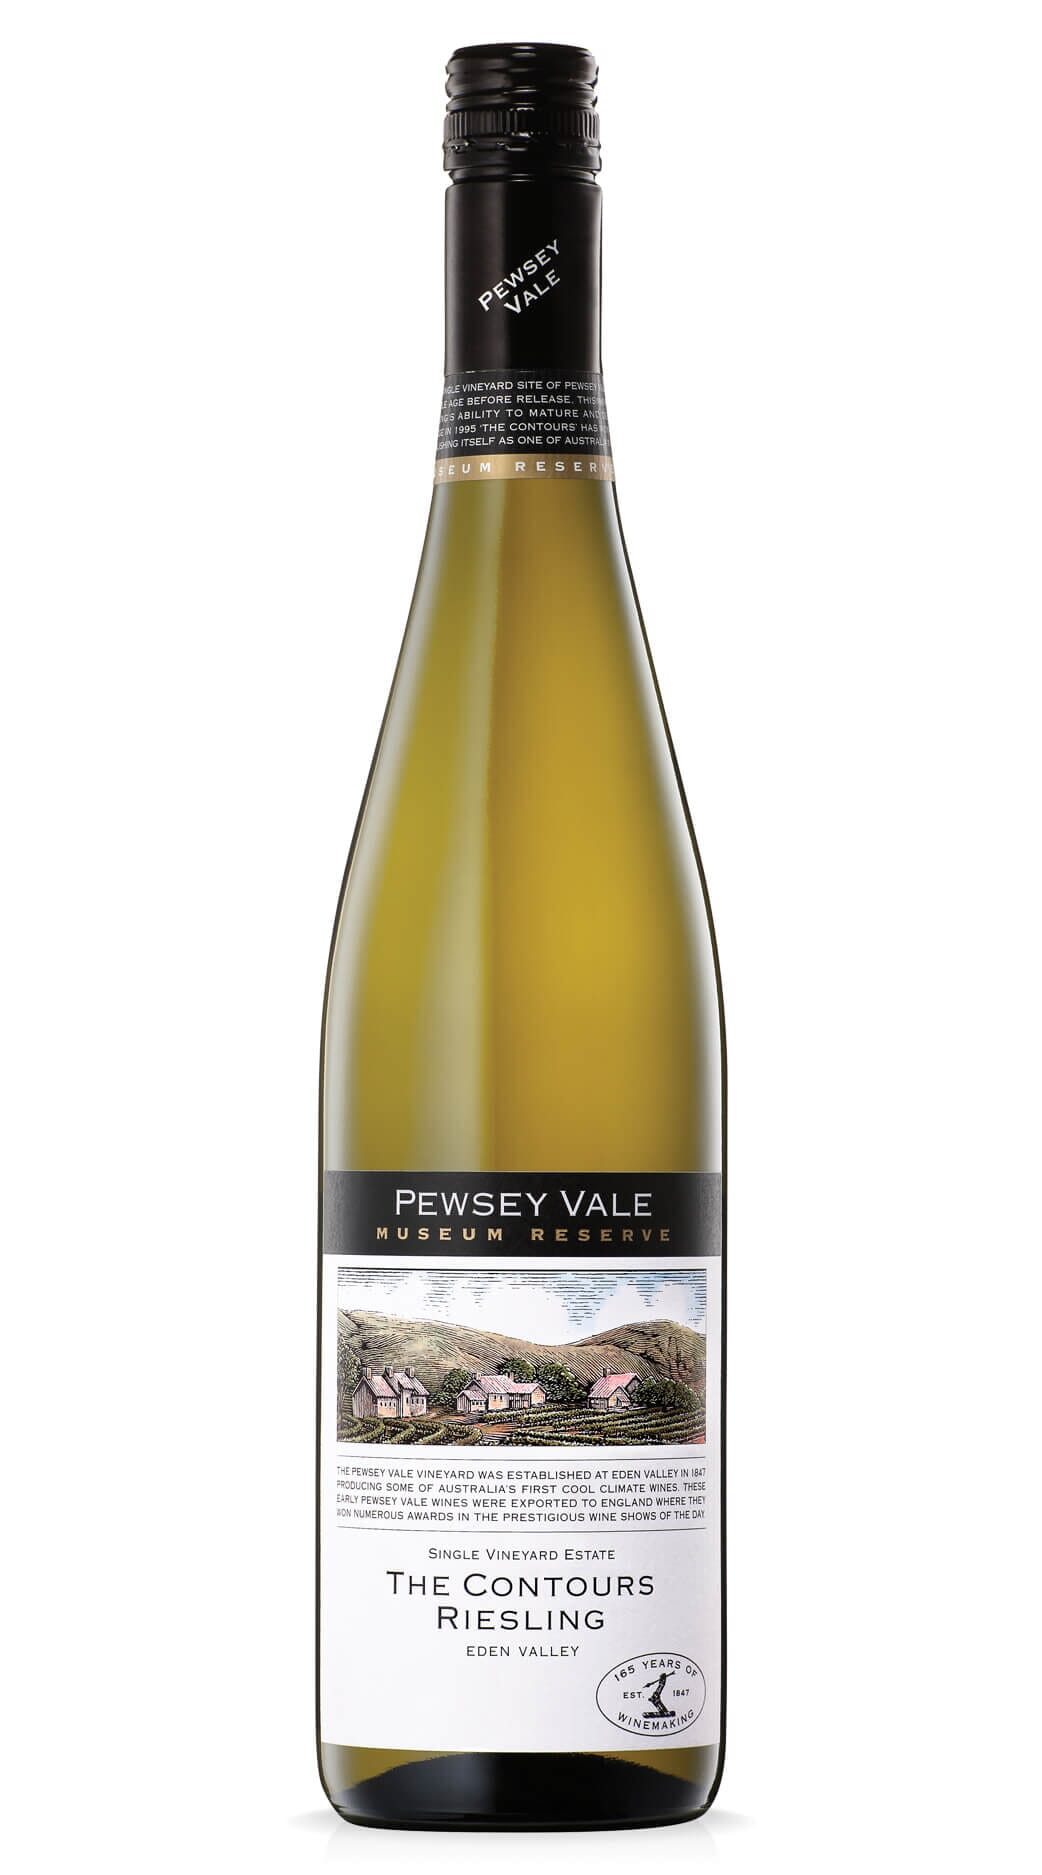 Pewsey Vale, 'The Contours,' Riesling, 2013 Wine Fells 